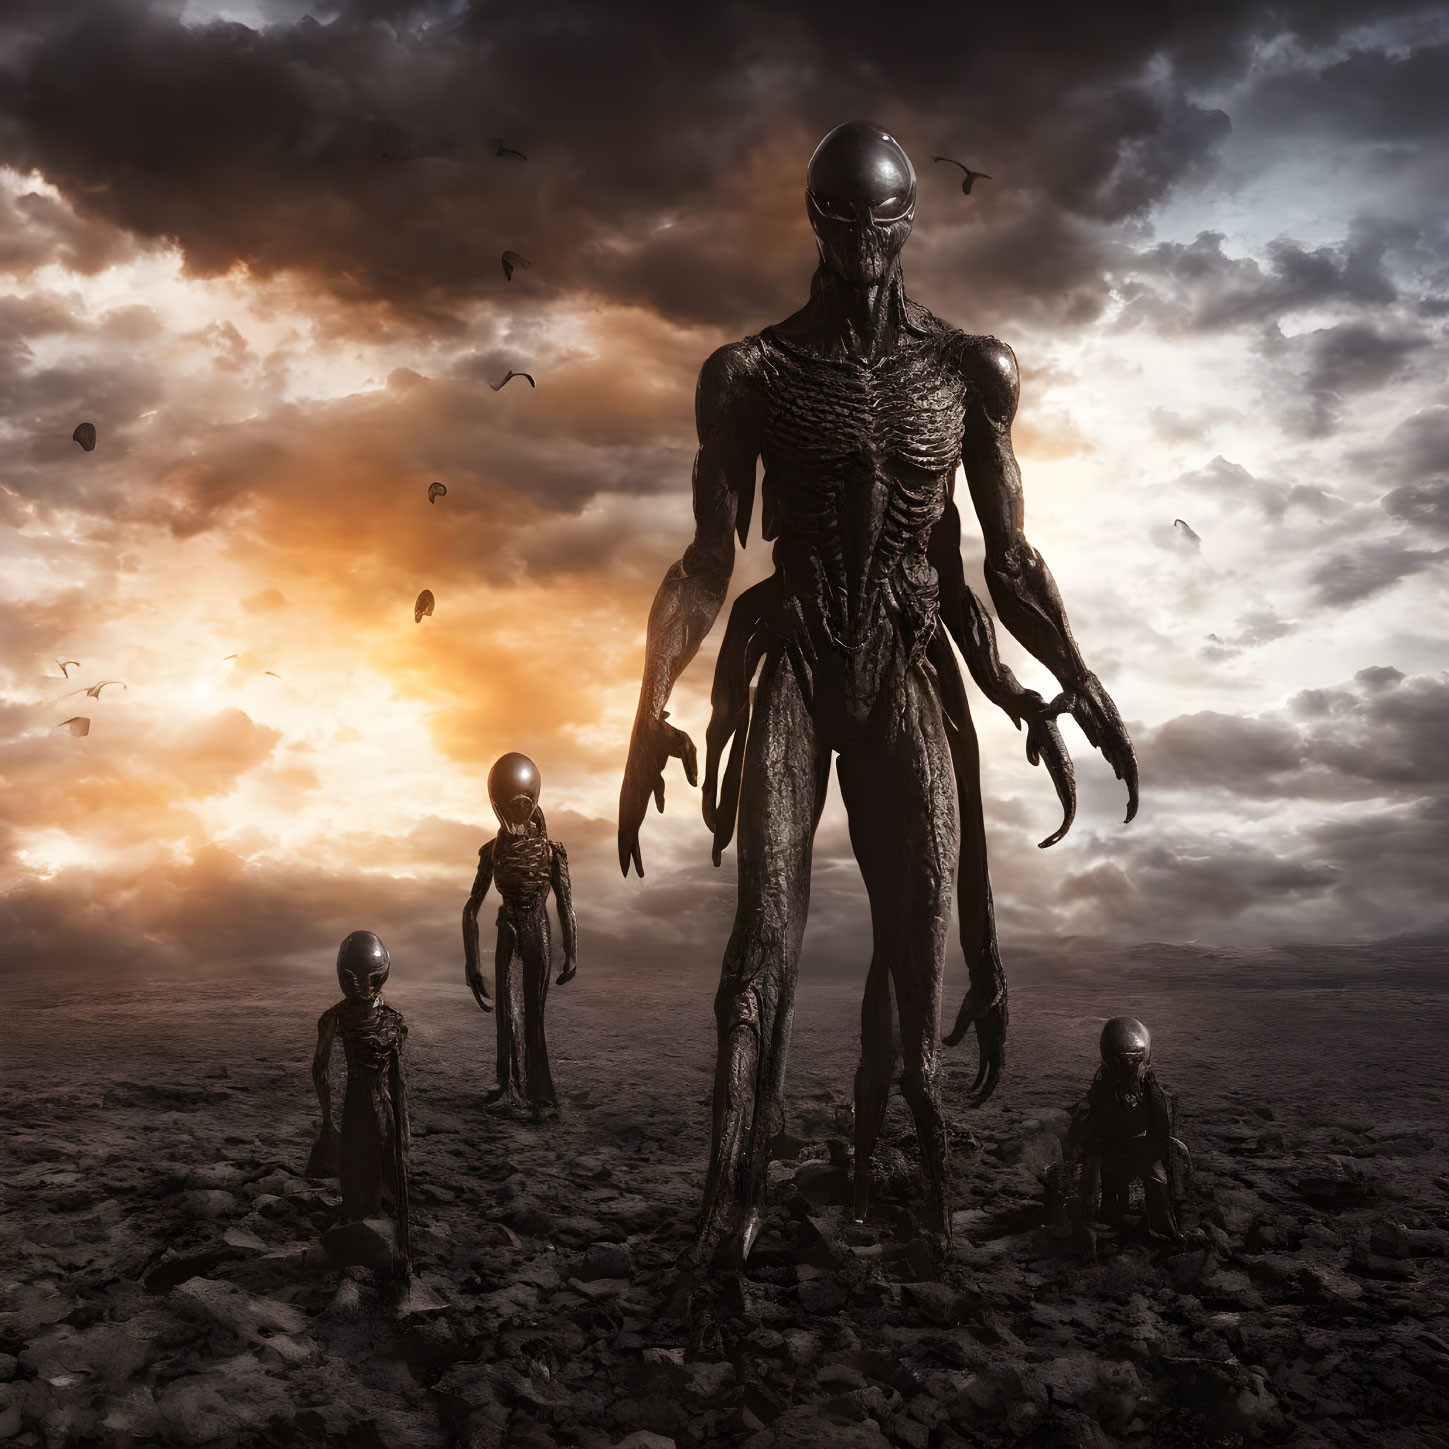 Post-apocalyptic landscape with giant alien figures under ominous sky